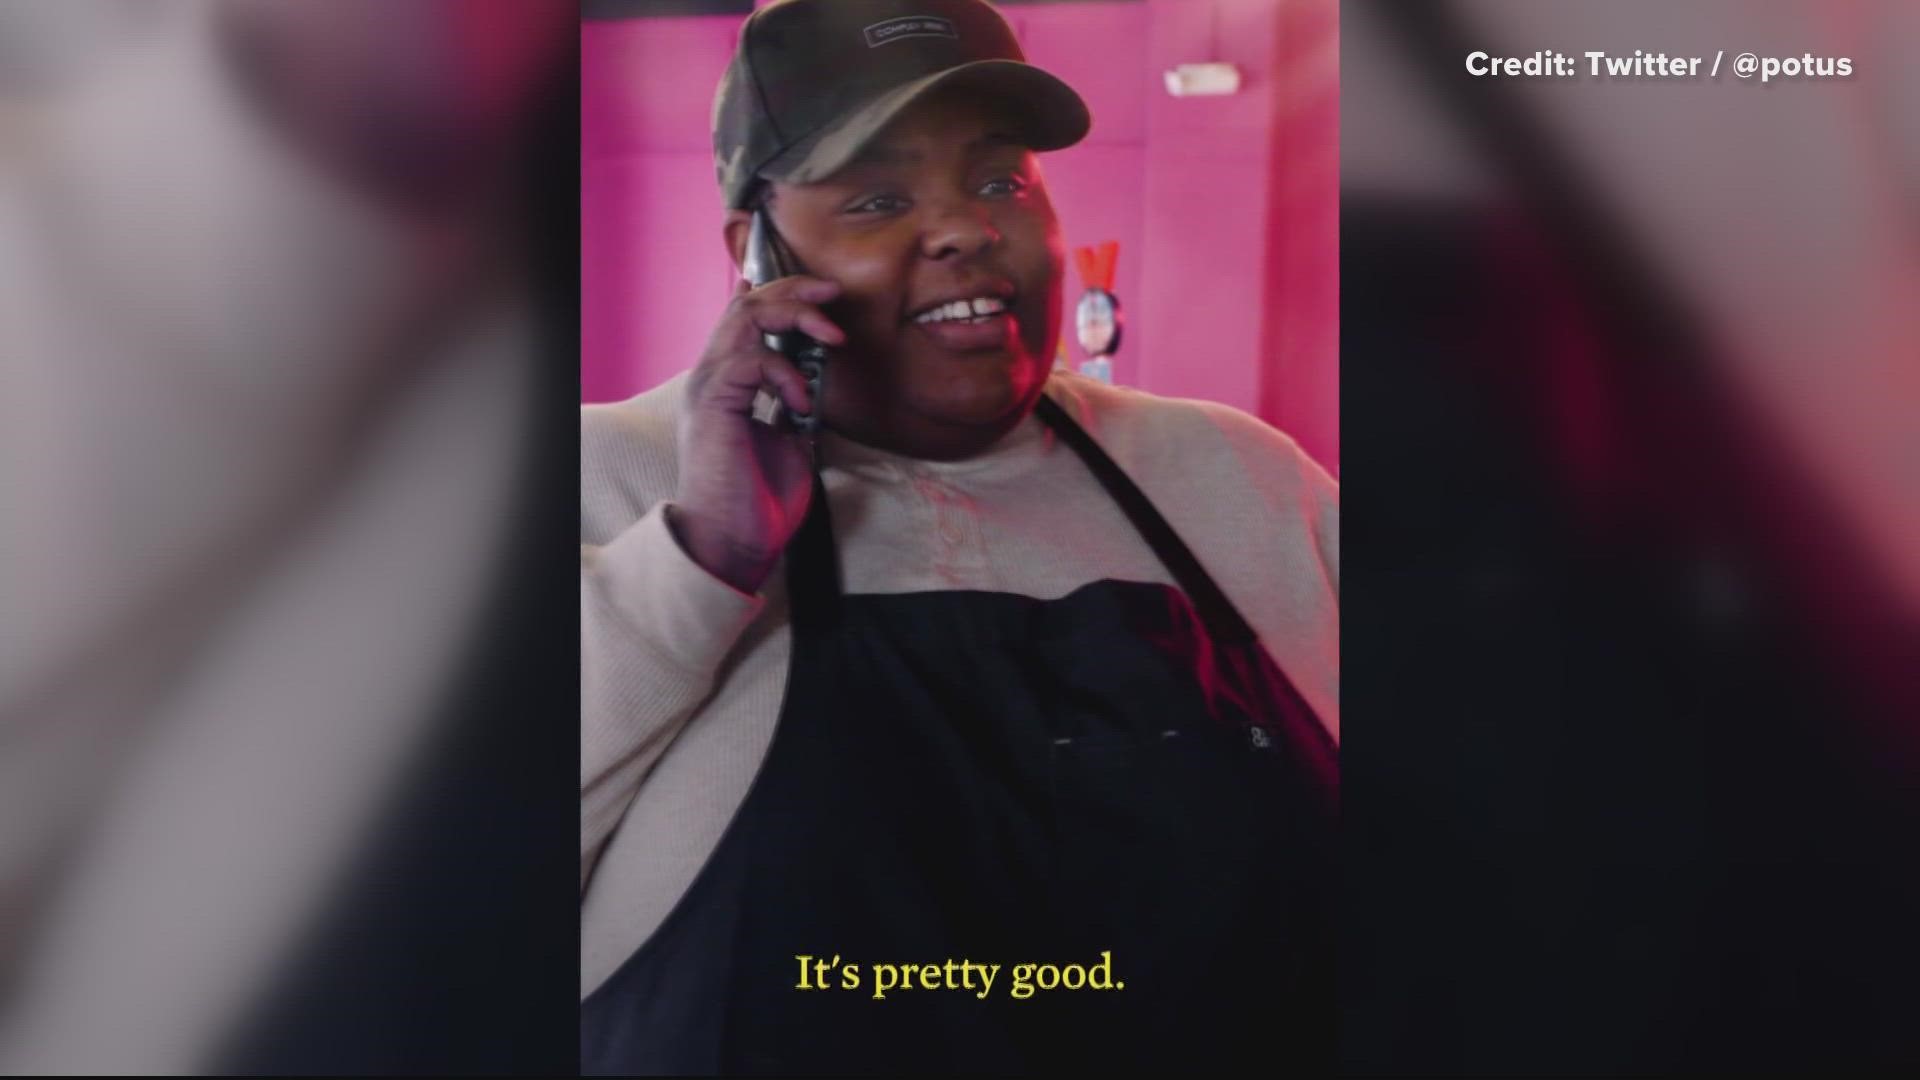 Brittany Spaddy works at Ghostburger in DC's Shaw neighborhood. She's usually off on Tuesdays. But the boss asked her to come in. And this happened.